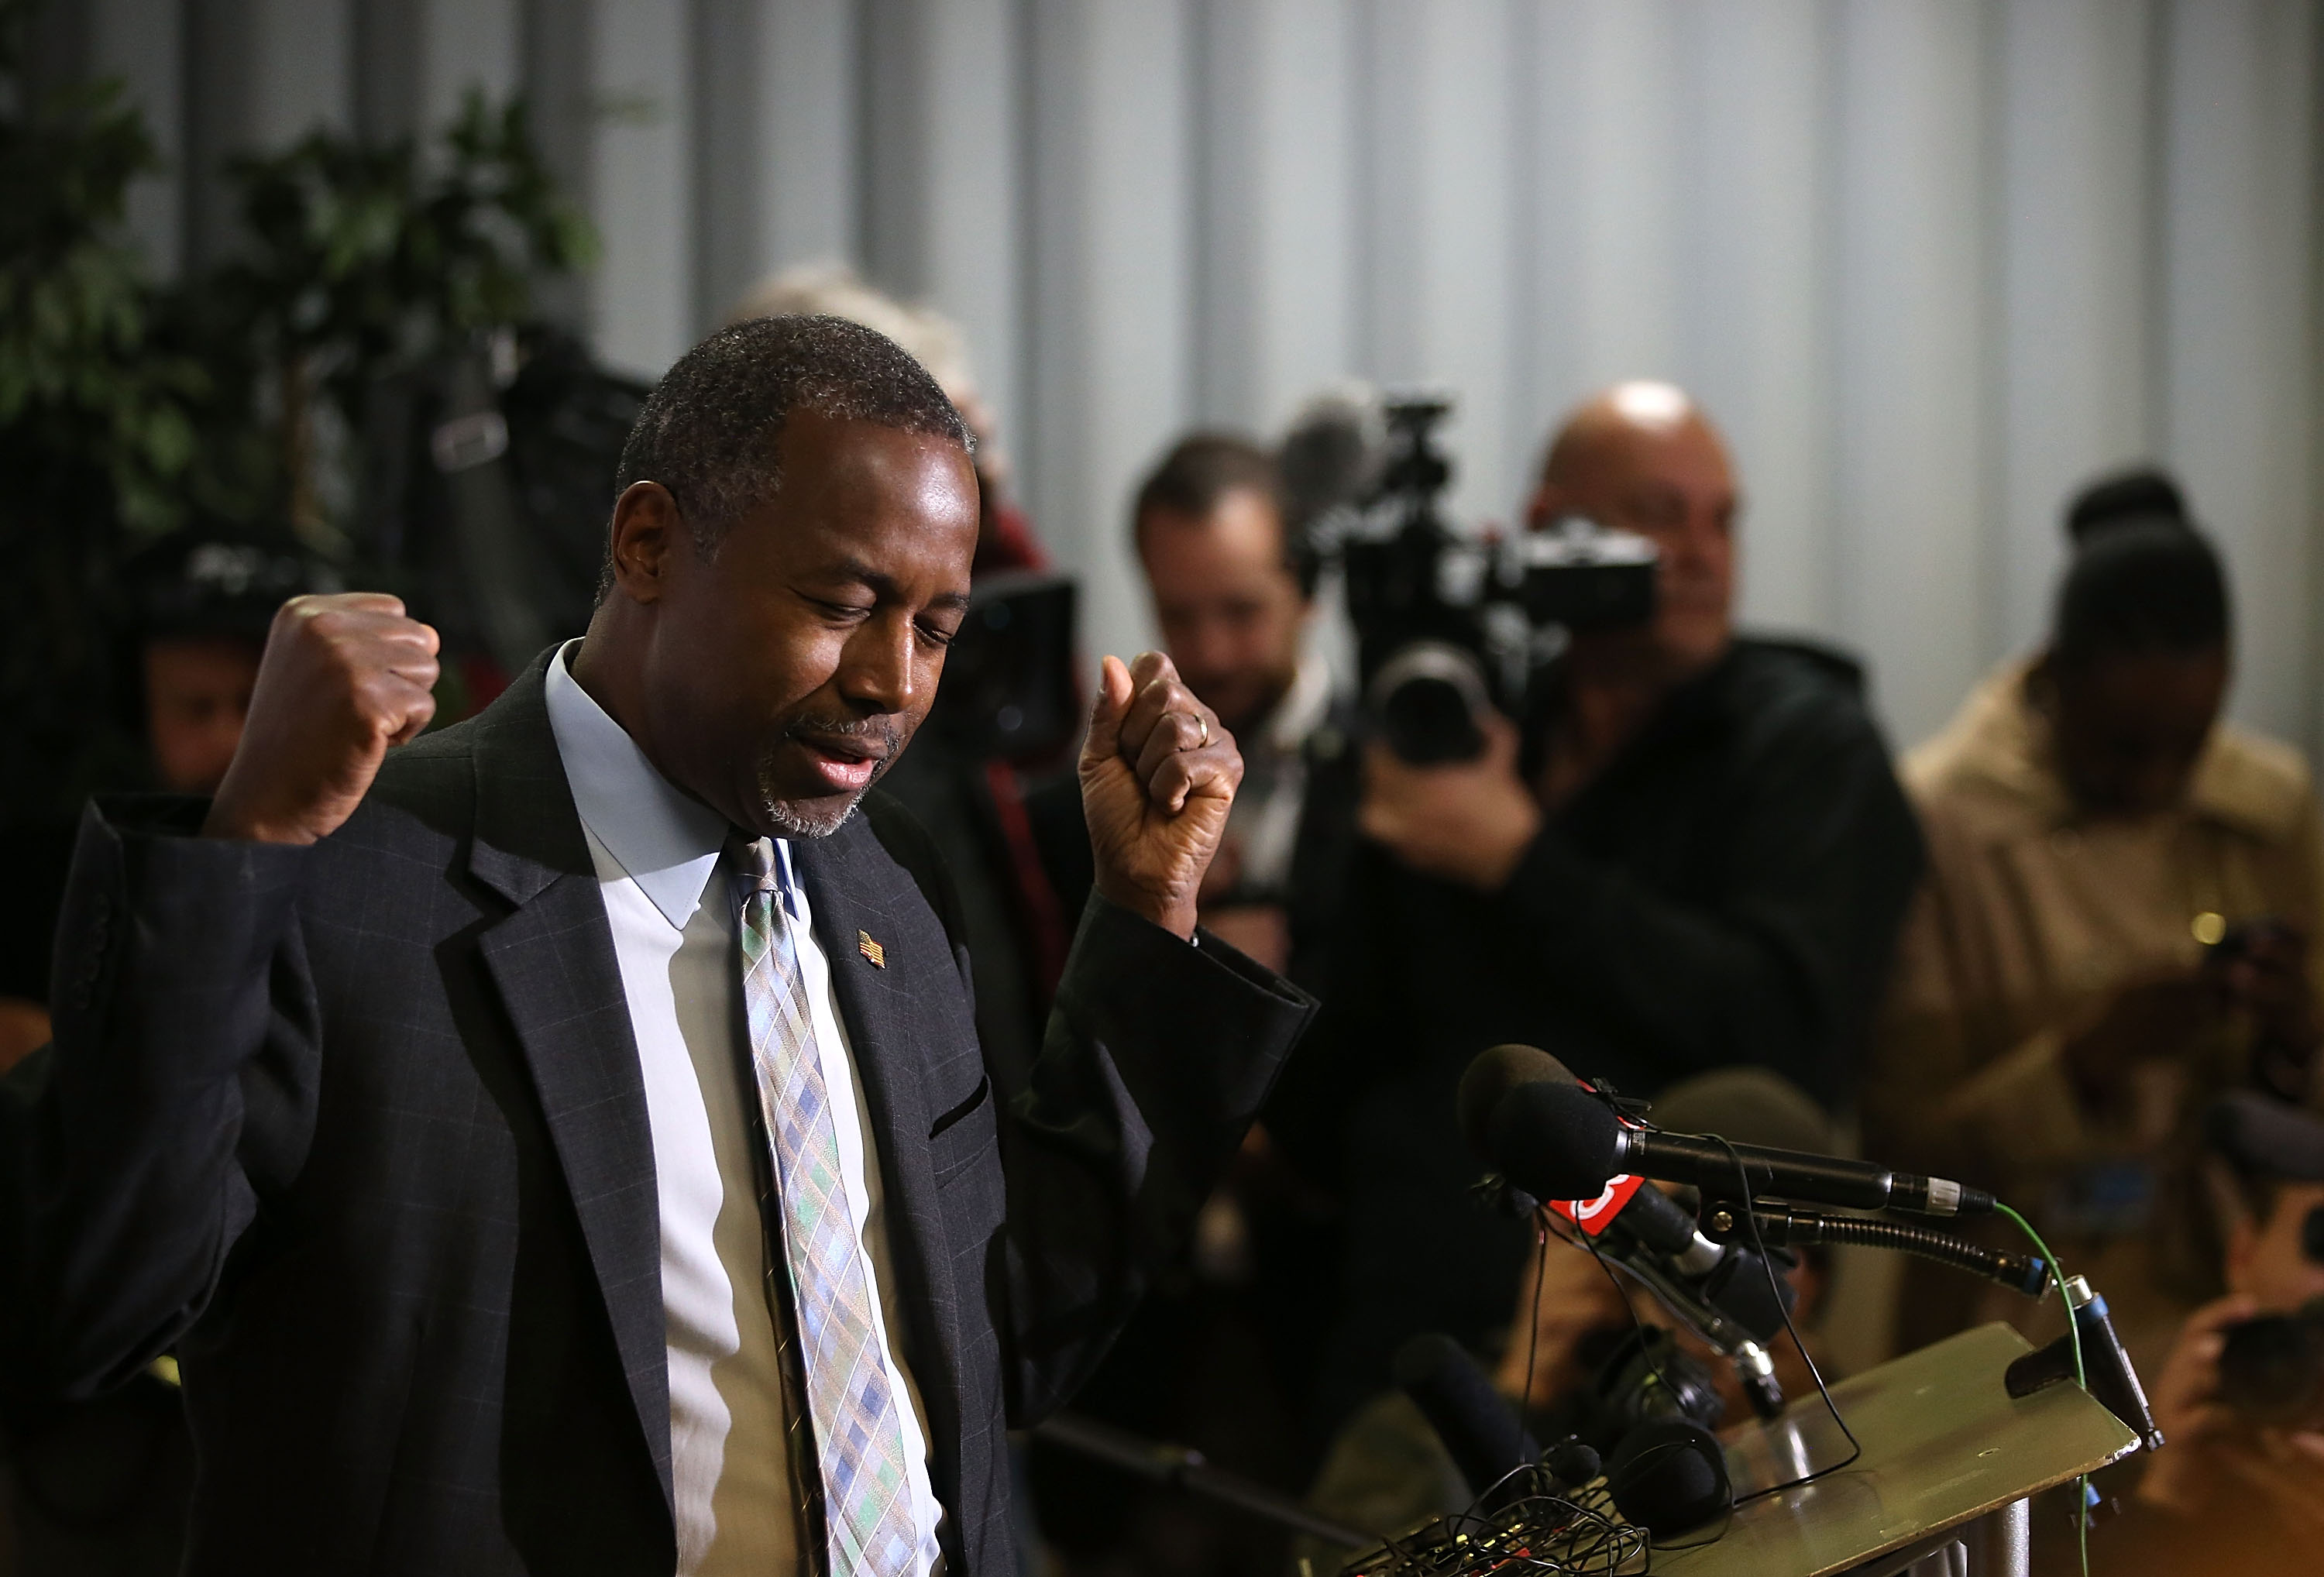 Republican presidential candidate, Ben Carson speaks during a news conference before a campaign event at Colorado Christian University on Oct. 29, 2015 in Lakewood, Colo. (Justin Sullivan—Getty Images)